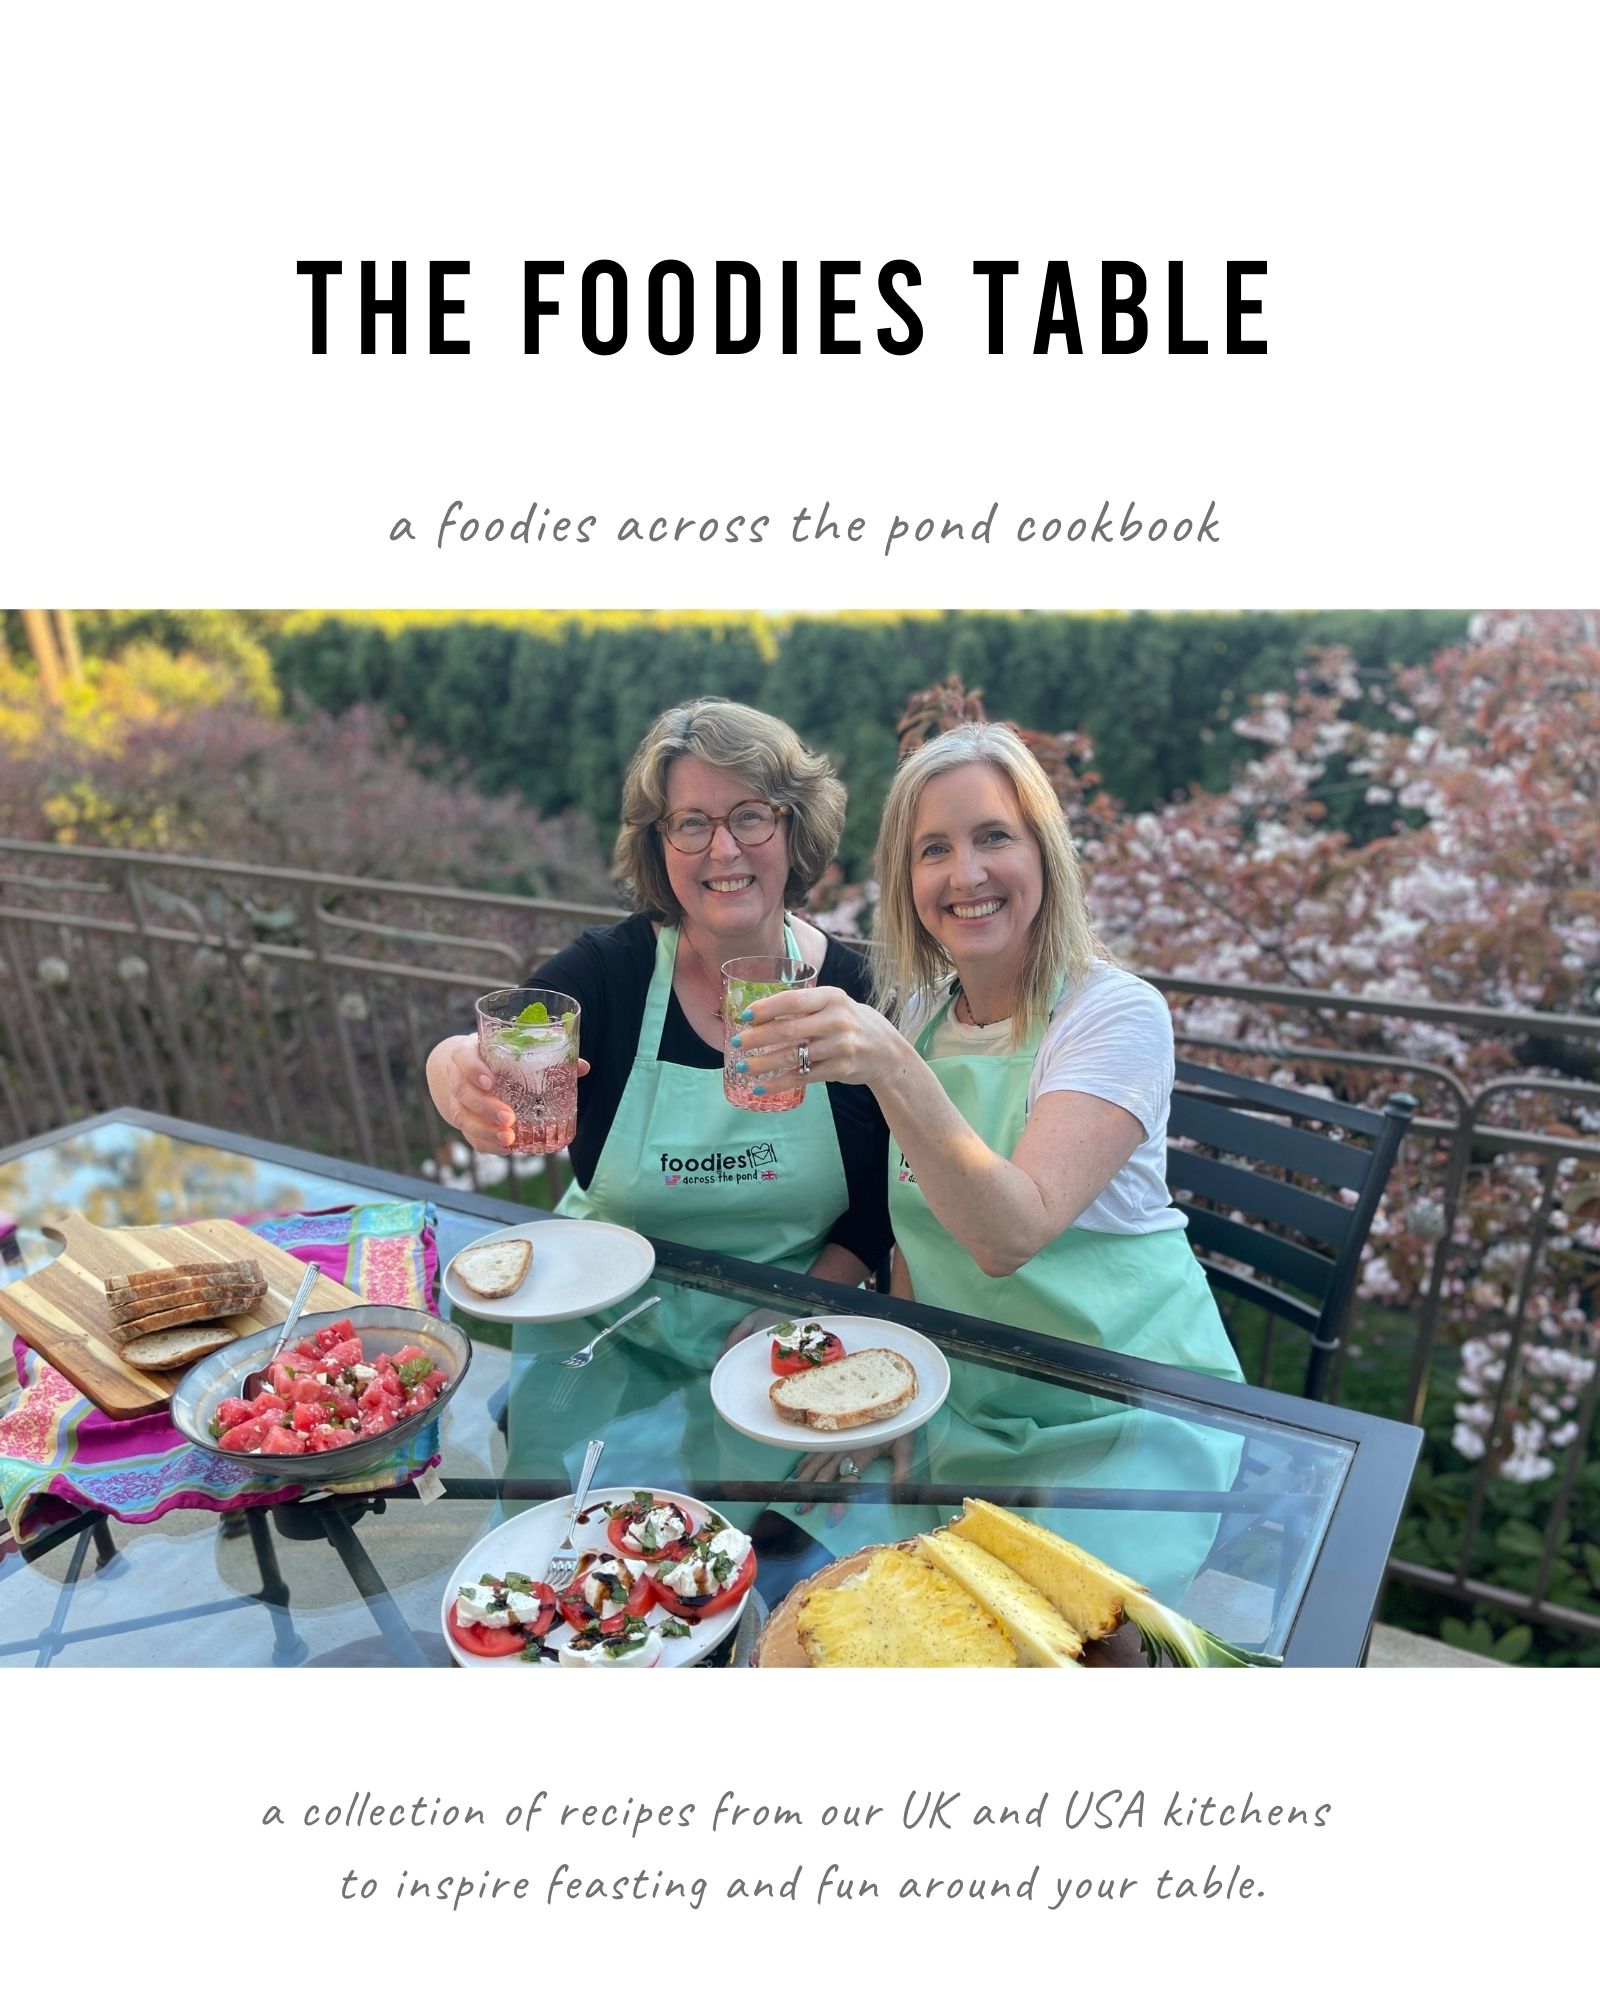 The Foodies Table